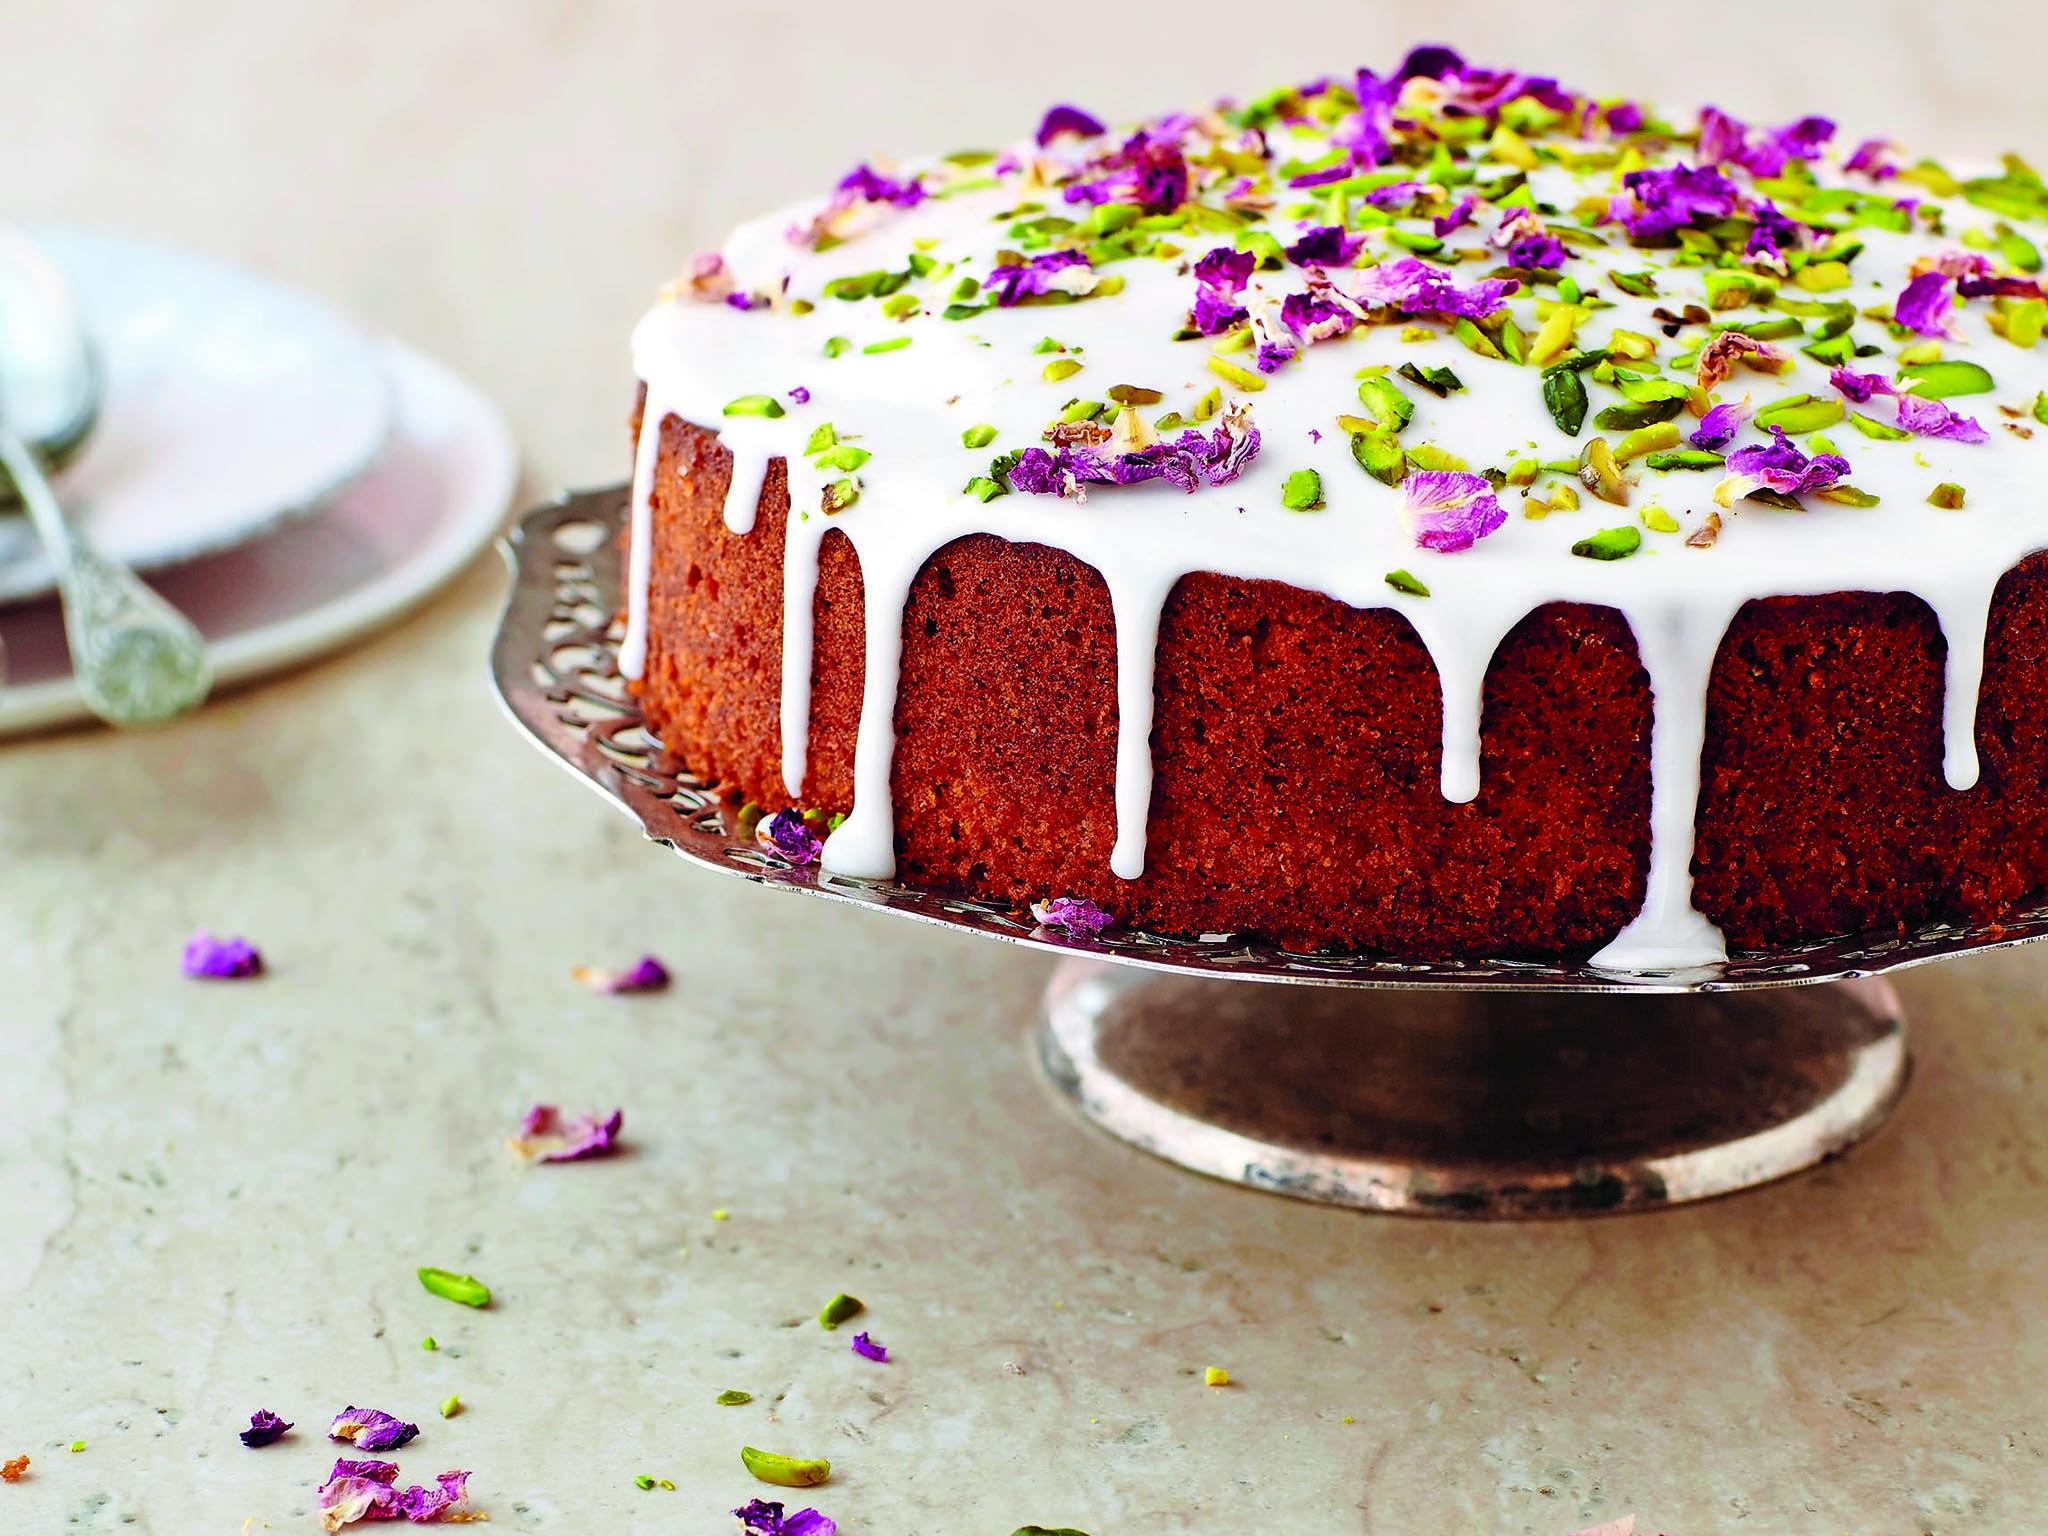 With scents from a Persian floral garden in spring, the cake is decorated in pistachios and rose petals (recipe below)